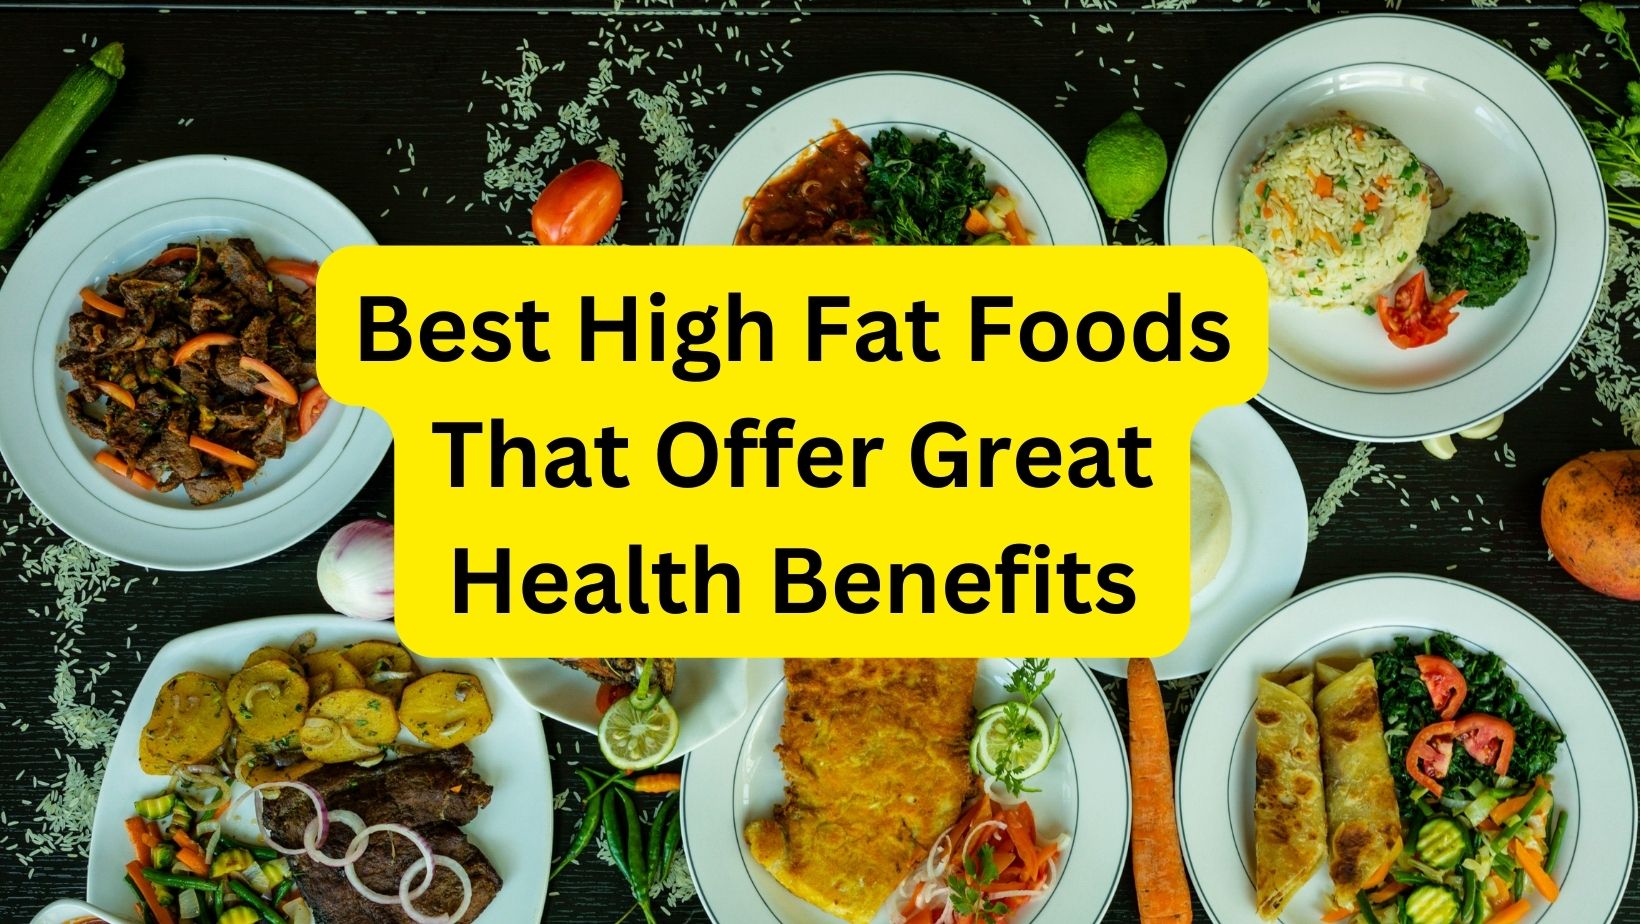 Best High Fat Foods That Offer Great Health Benefits